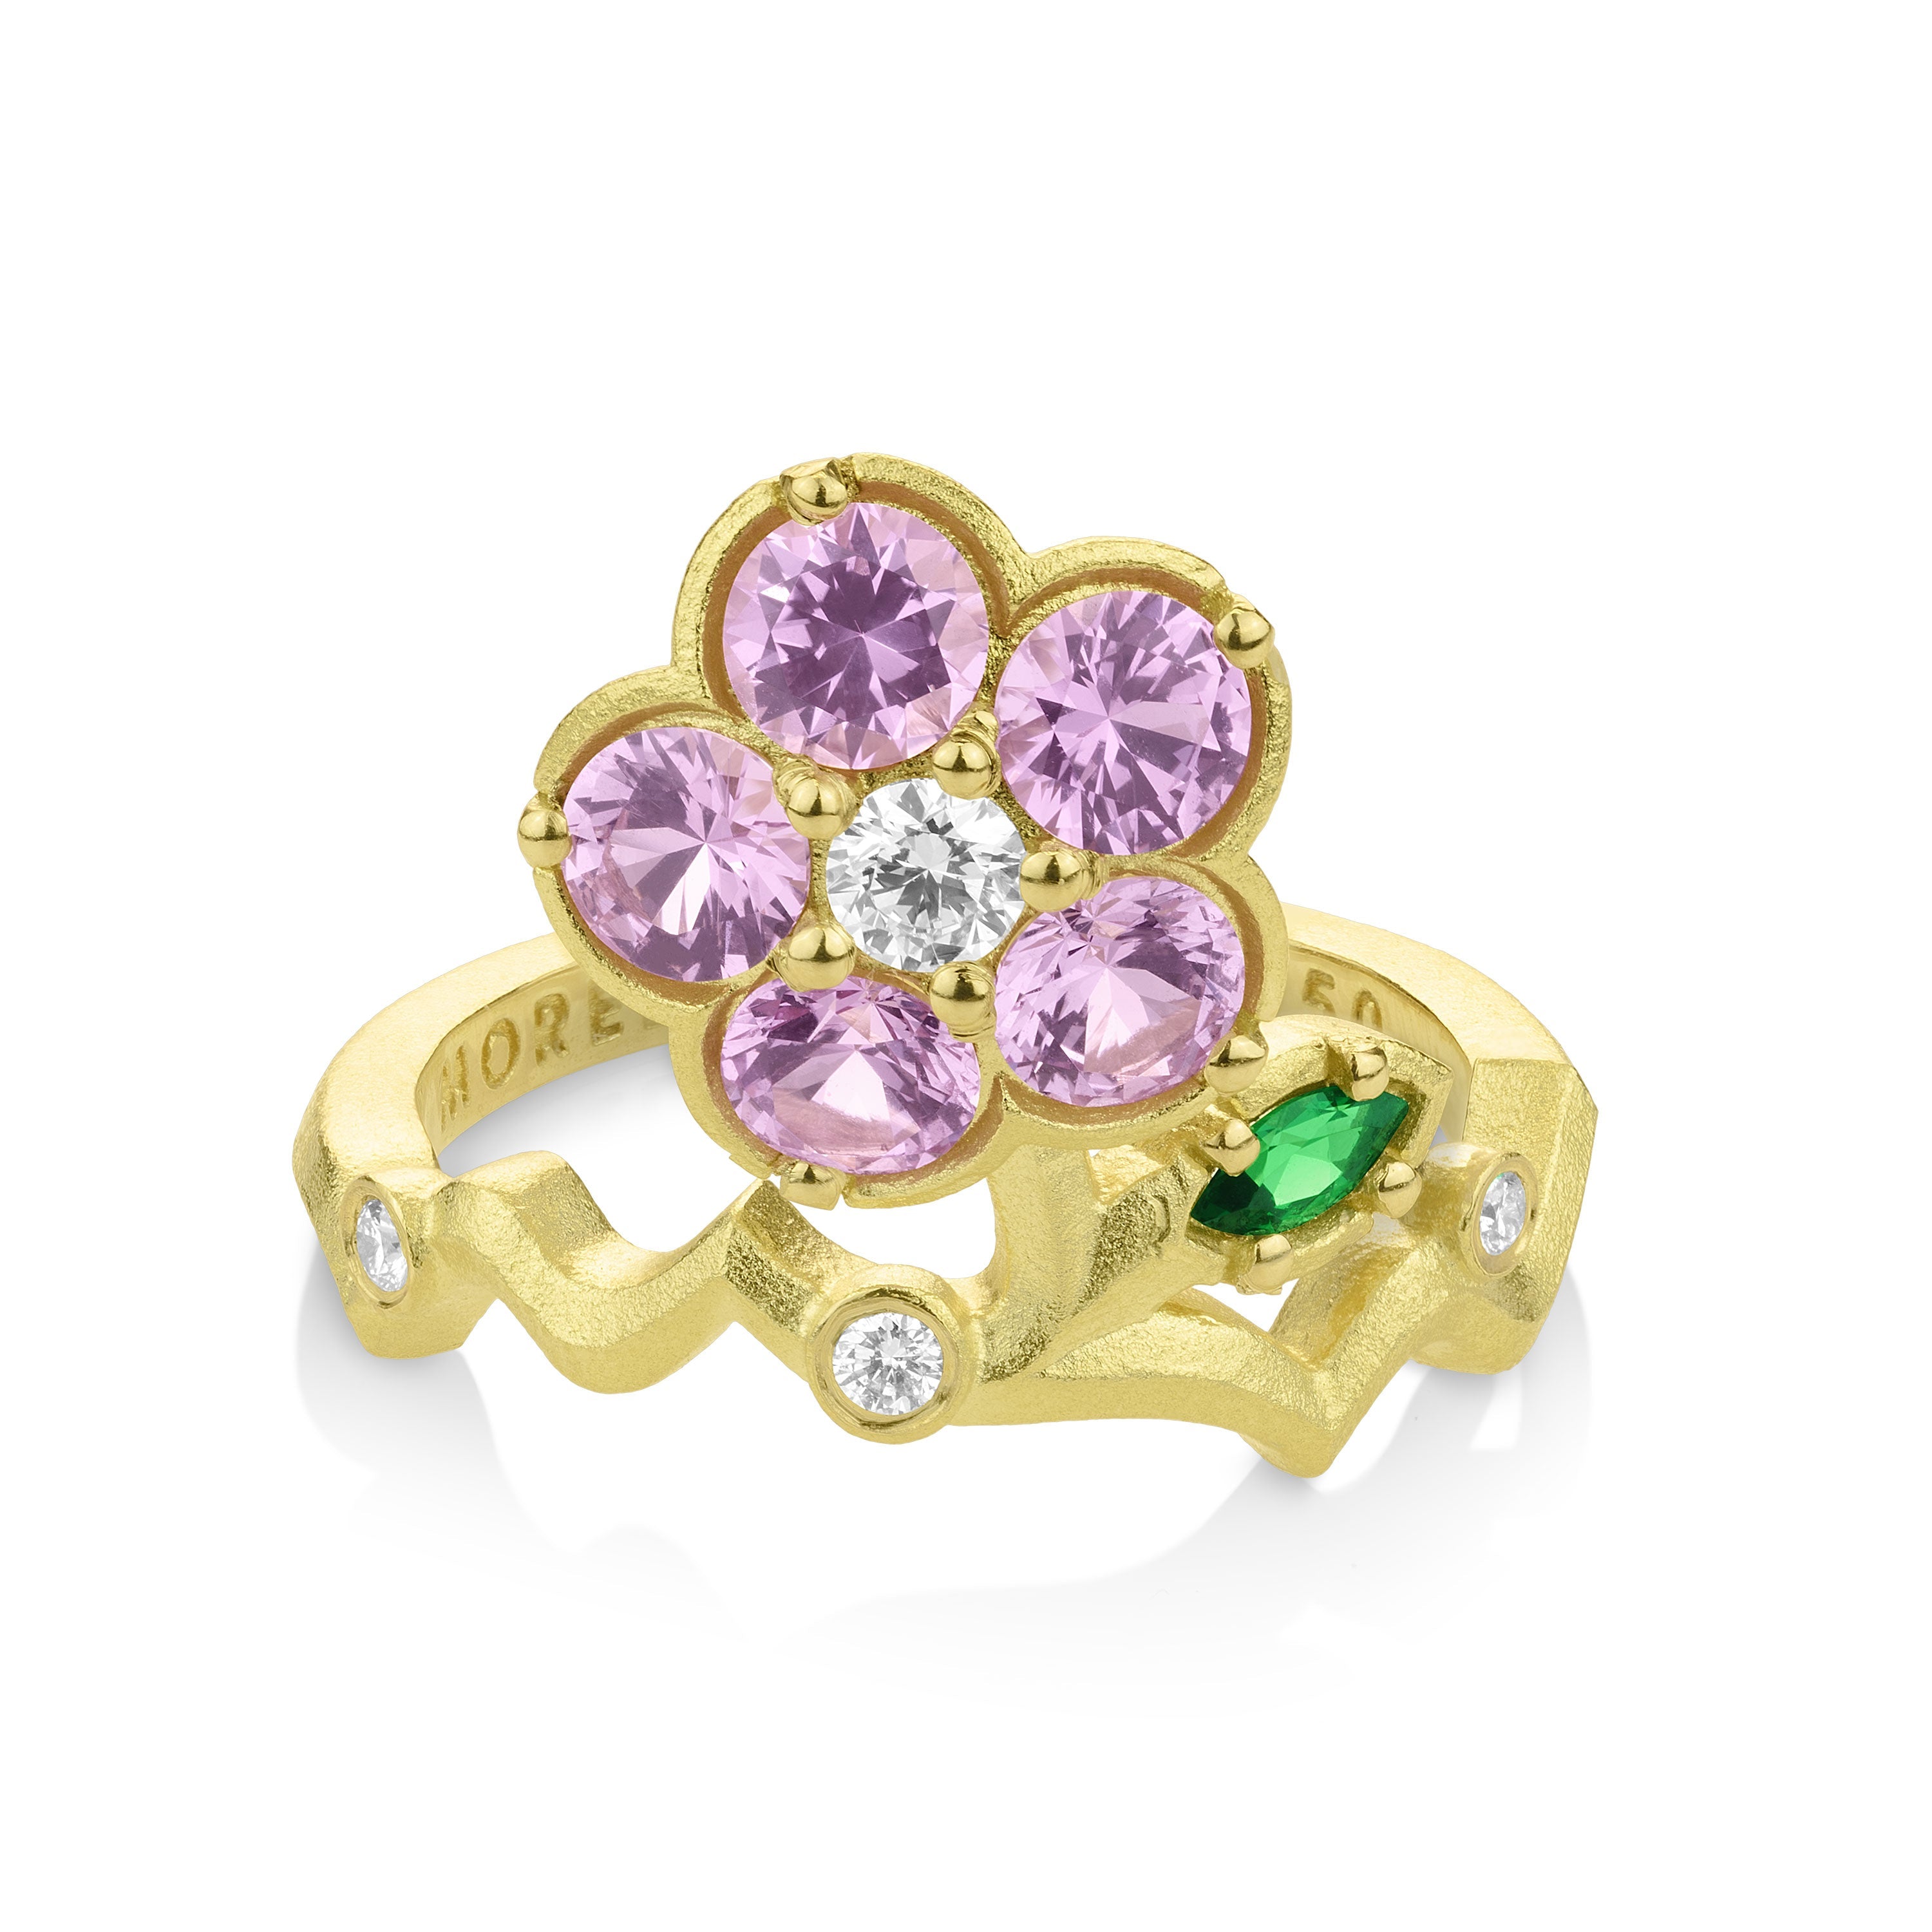 Paul Morelli Wild Child Ring with Pink Sapphire - Be On Park